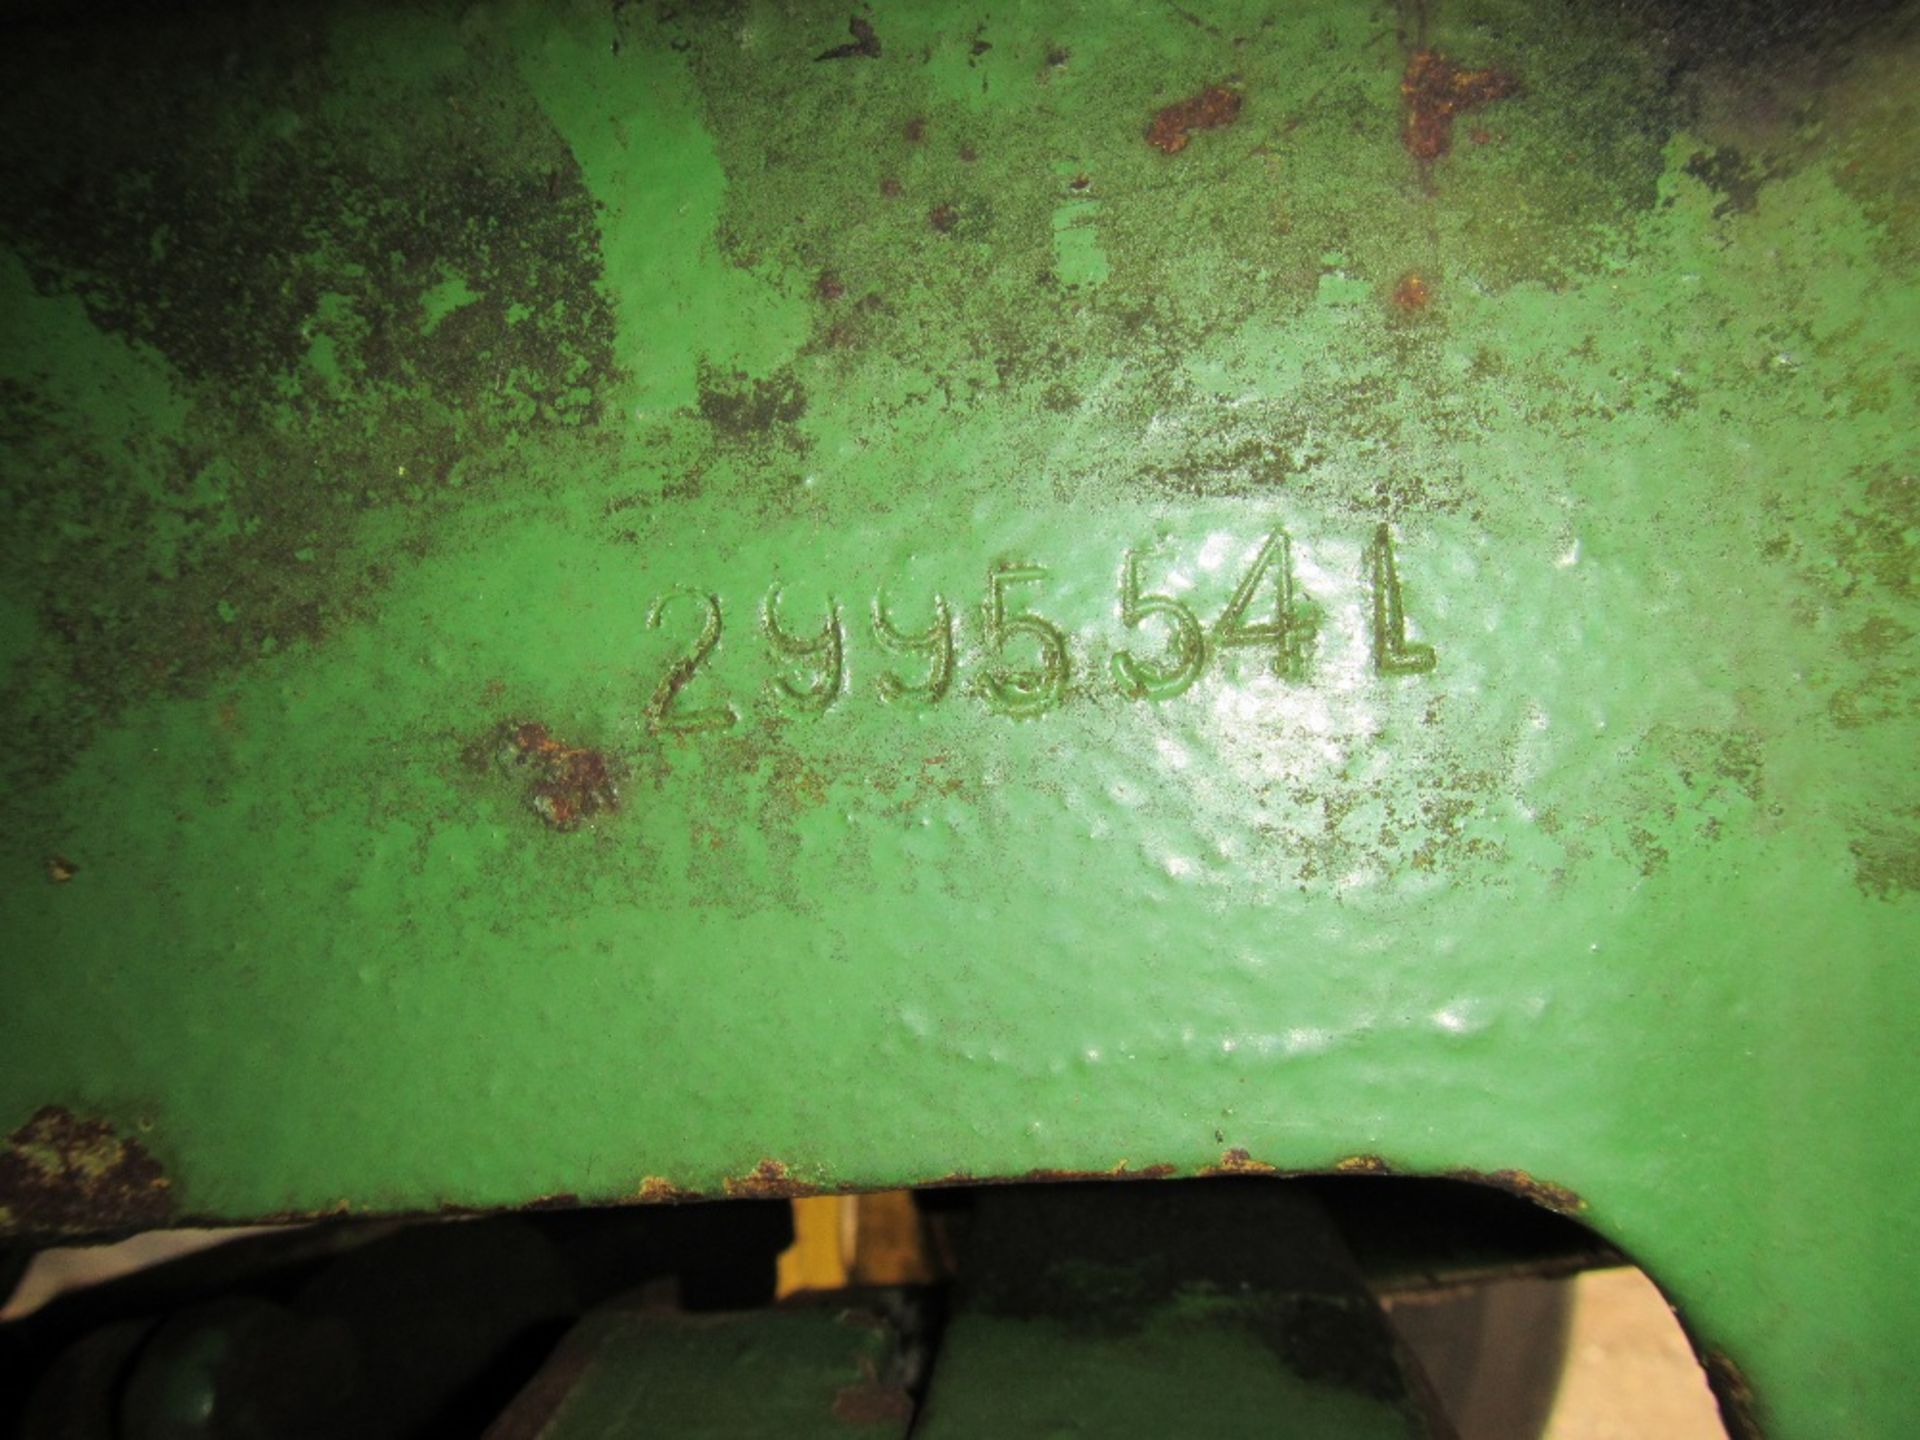 John Deere 3040 4wd Tractor. Subject to TOTAL LOSS INSURANCE CLAIM Reg. No. A122 VFE - Image 12 of 12